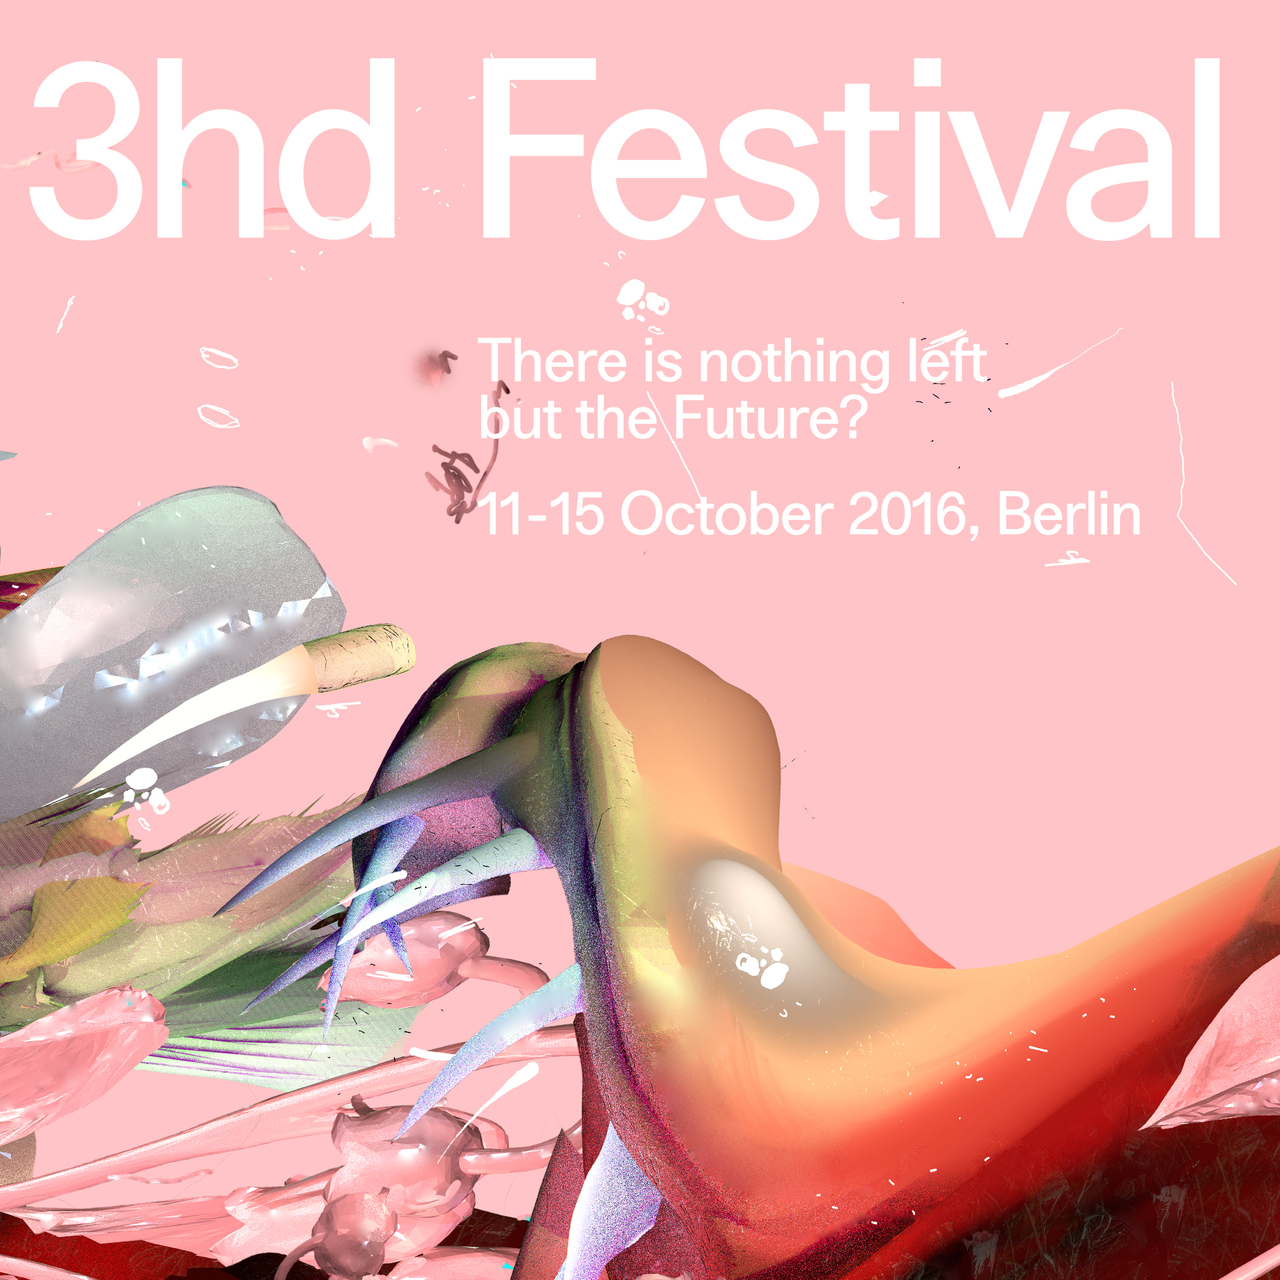 3hd Festival 2016 - There is nothing left but the Future